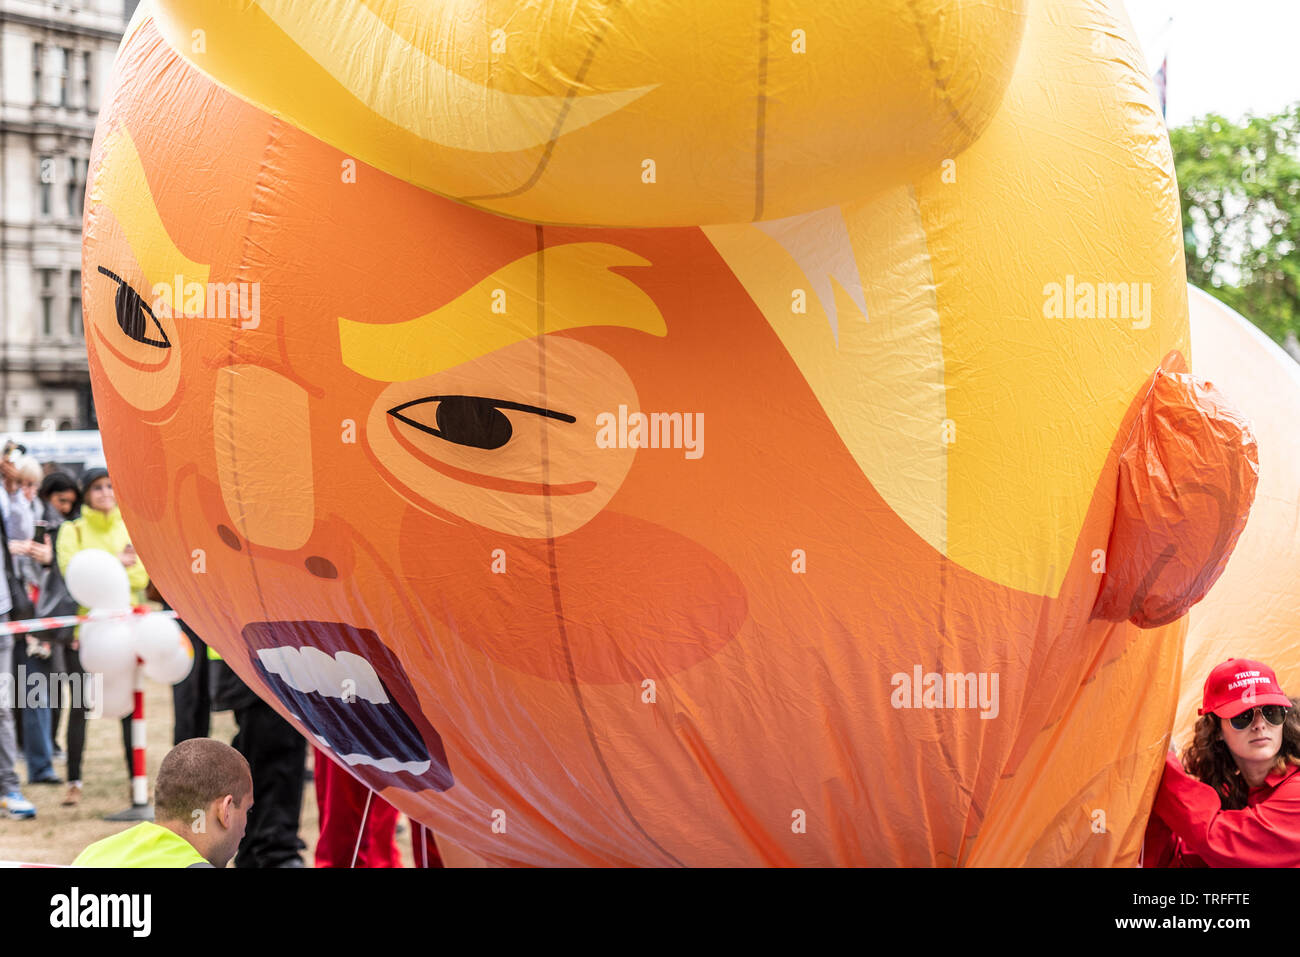 Donald Trump baby blimp balloon in Parliament Square, London, UK during US President State Visit. Face during inflation. Angry appearance Stock Photo